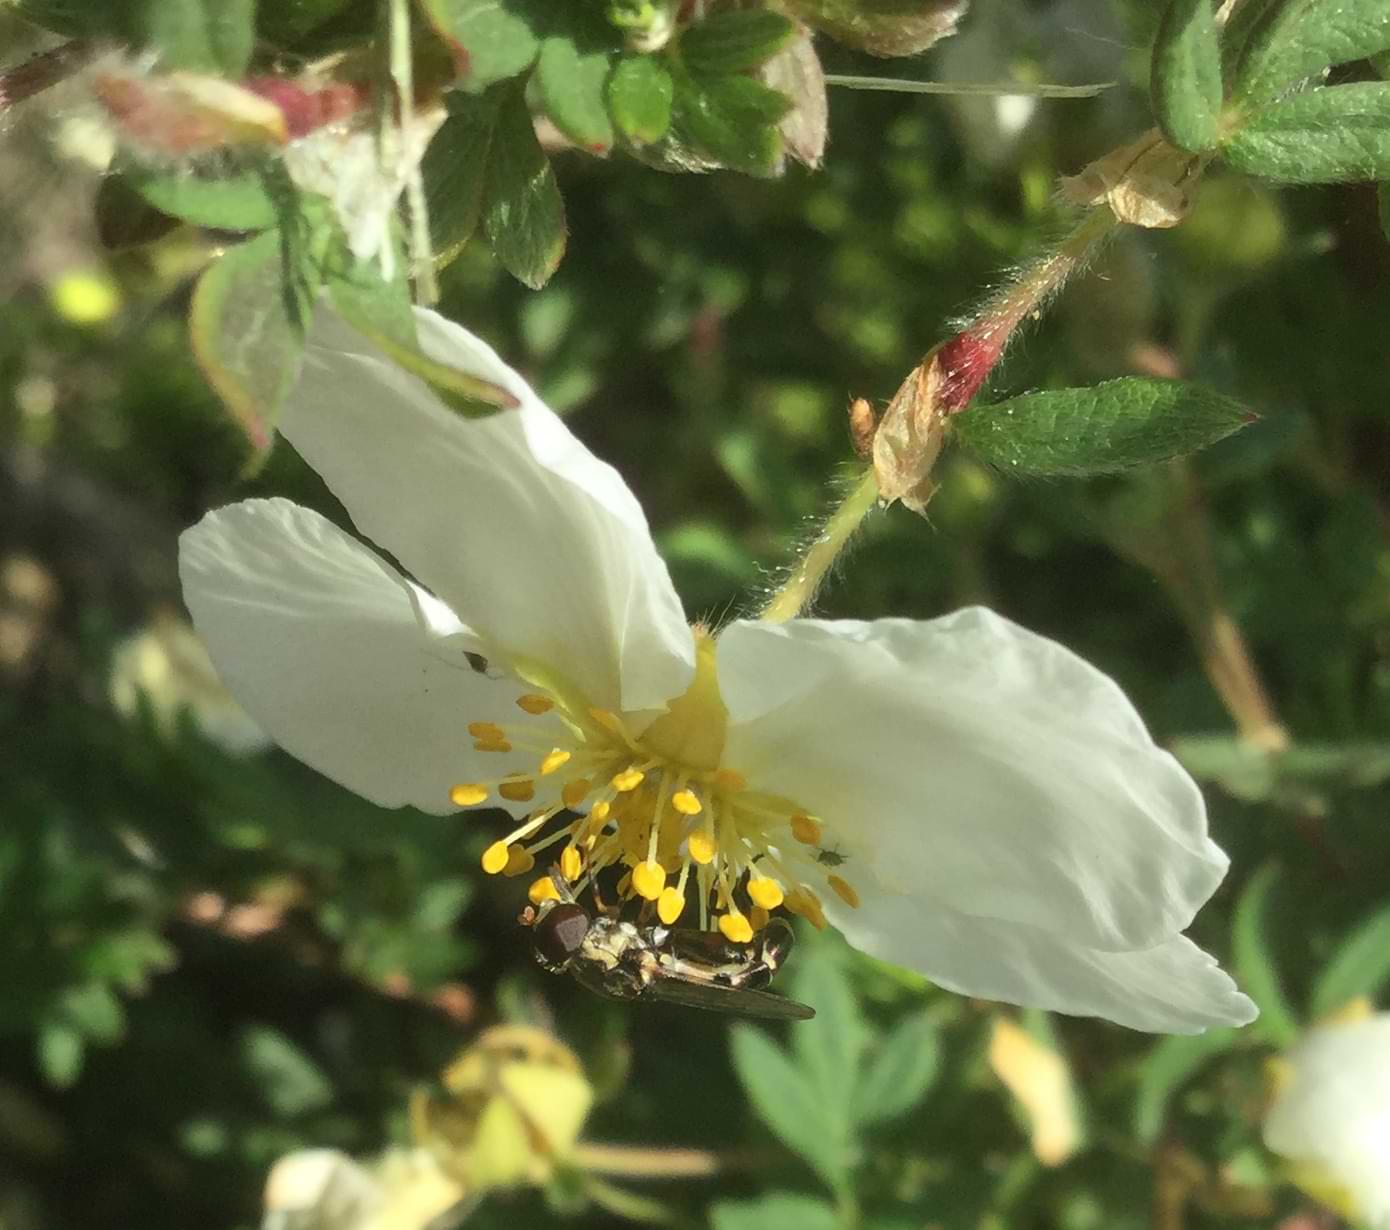 A close up photo of white flower. Resting on the flower head is a large black hoverfly with lighter-coloured banding running across its body.